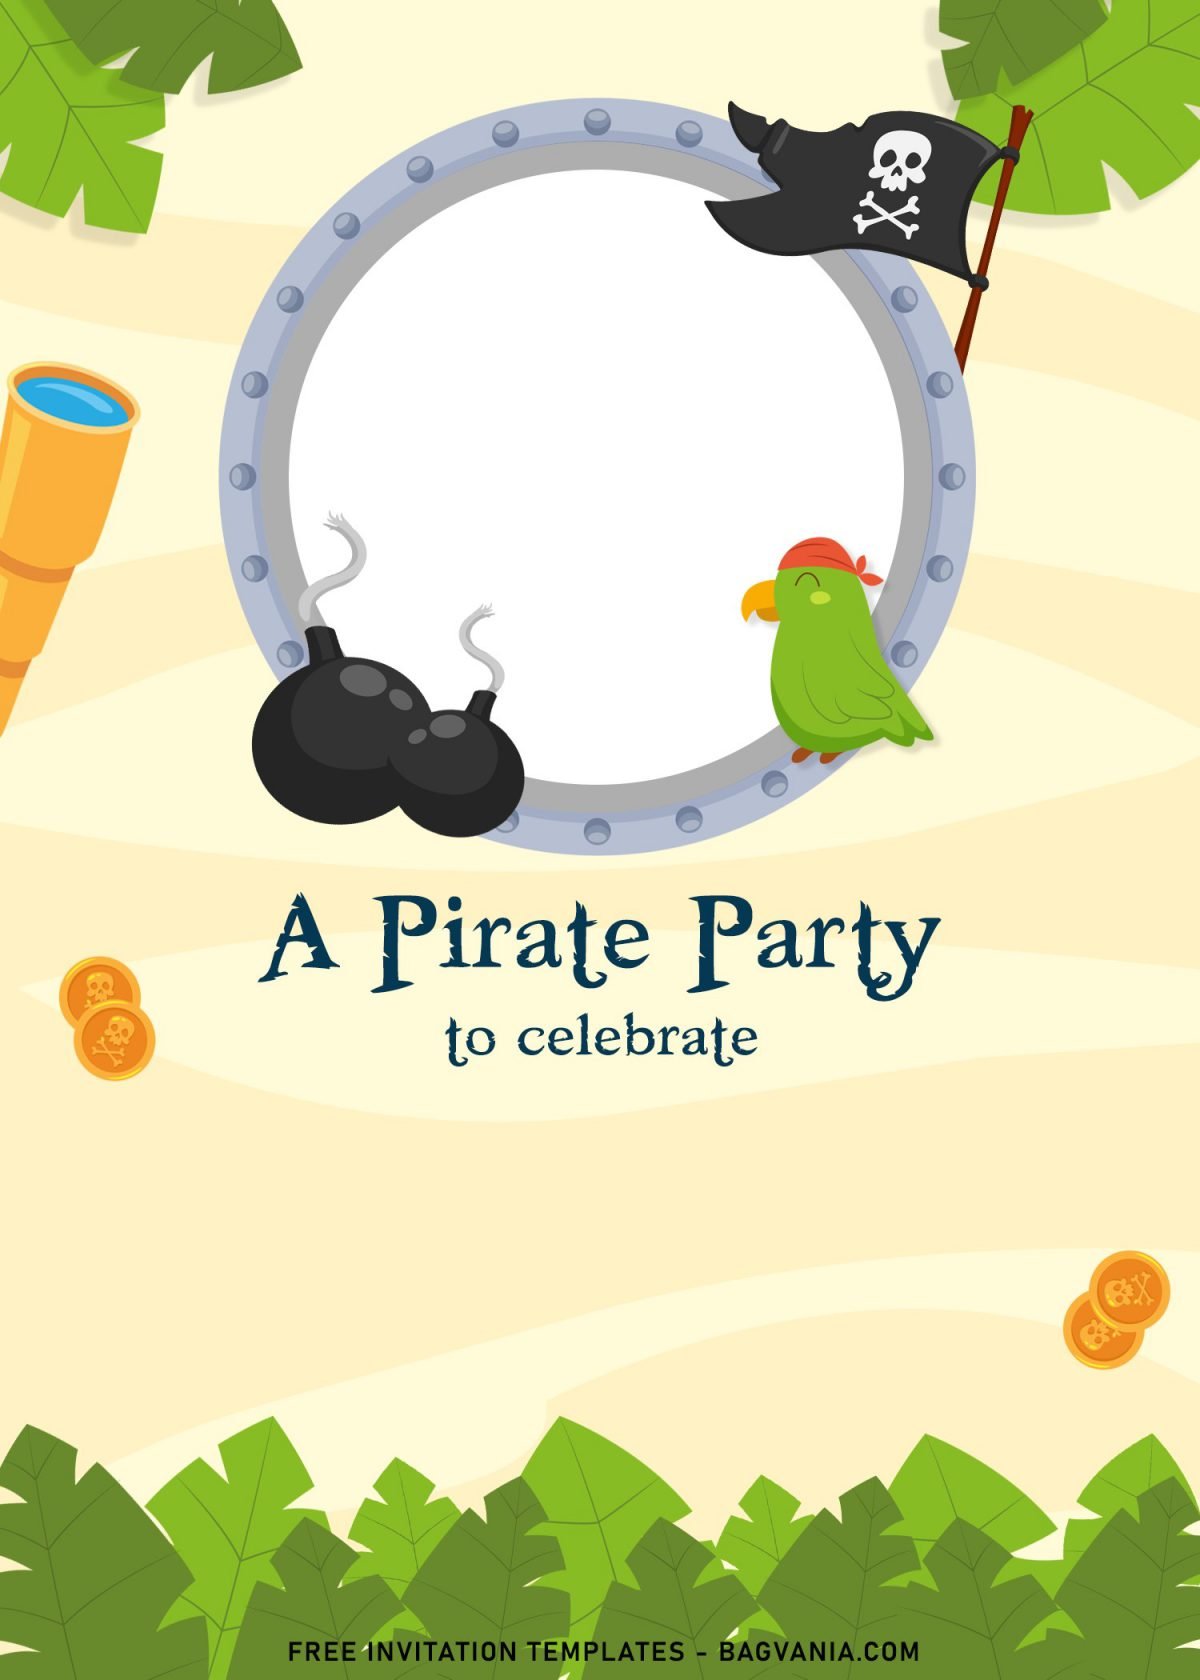 9+ Cute Pirate Birthday Invitation Templates For Your Son's Upcoming Birthday and has Cute Baby Parrot